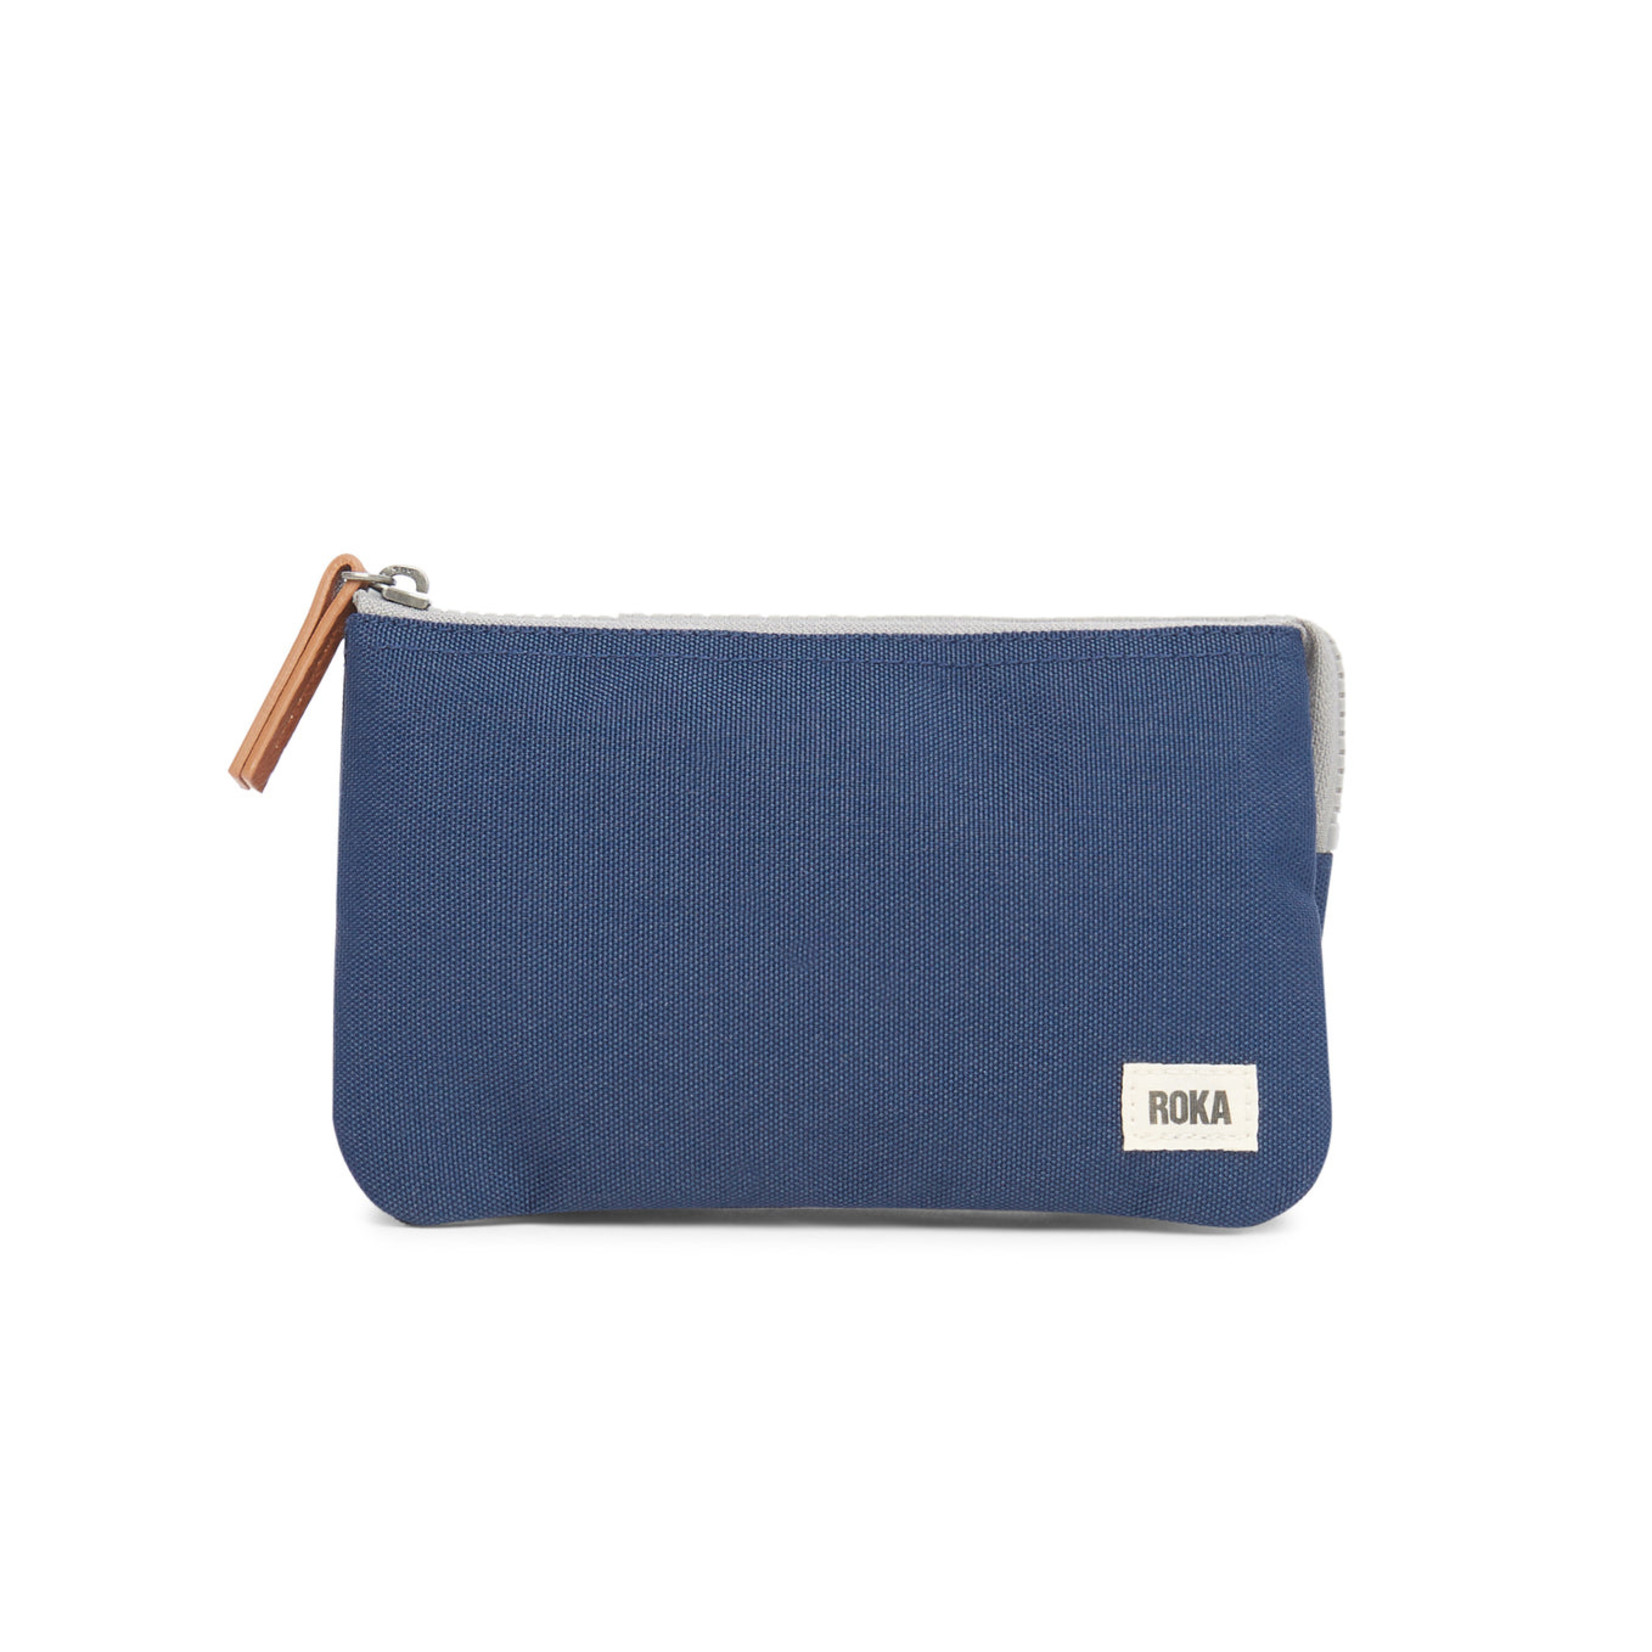 ROKA London Carnaby Wallet Sustainable Canvas Mineral